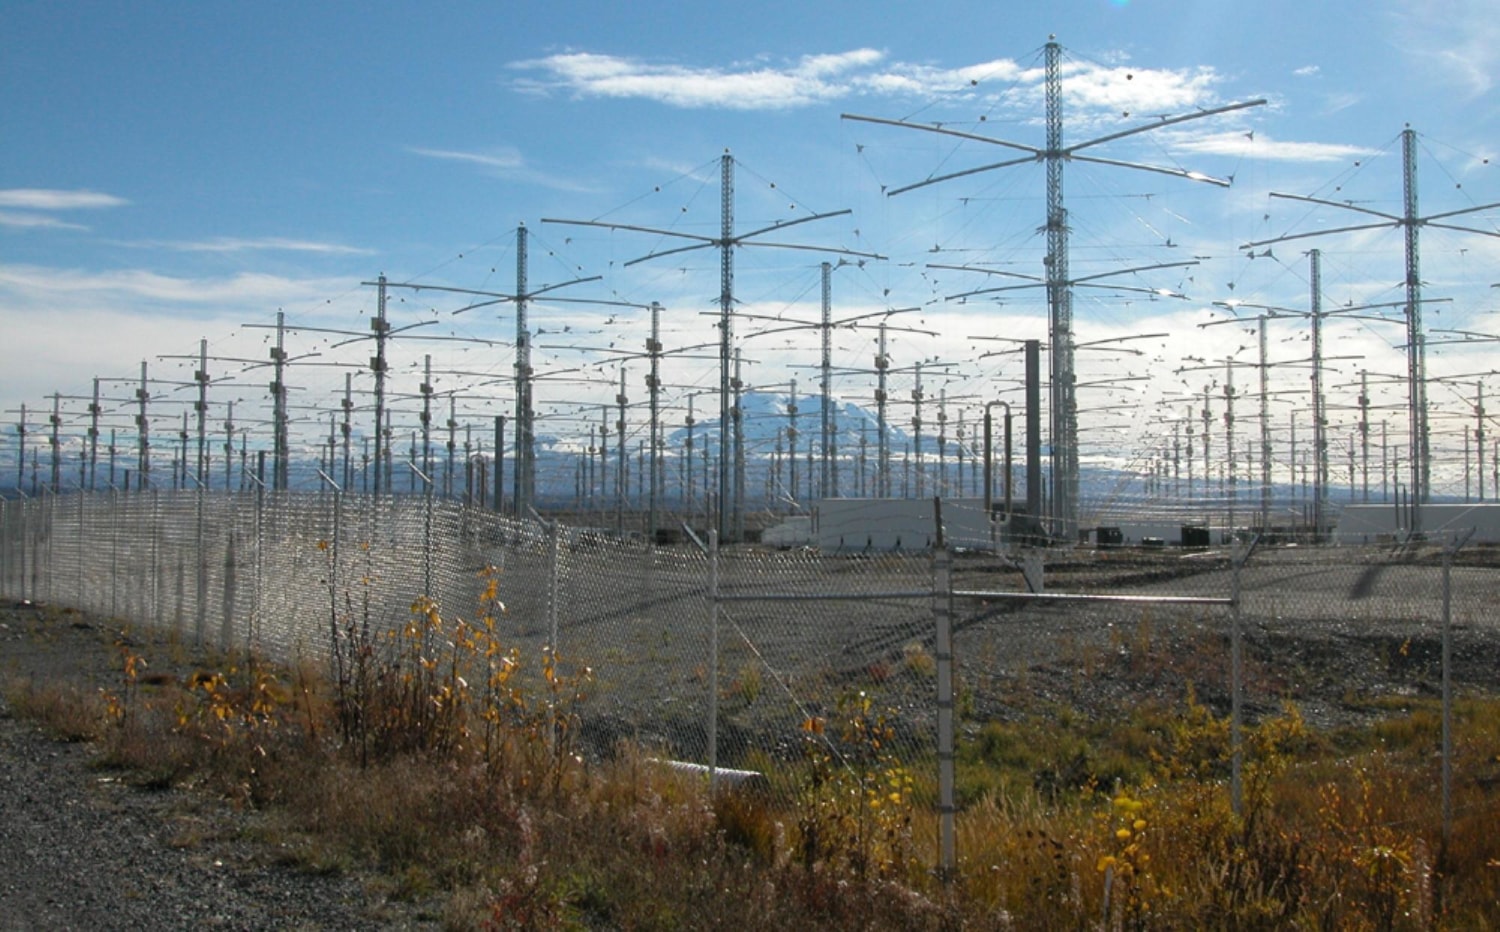 Conspiracy Theories Abound as U.S. Military Closes HAARP